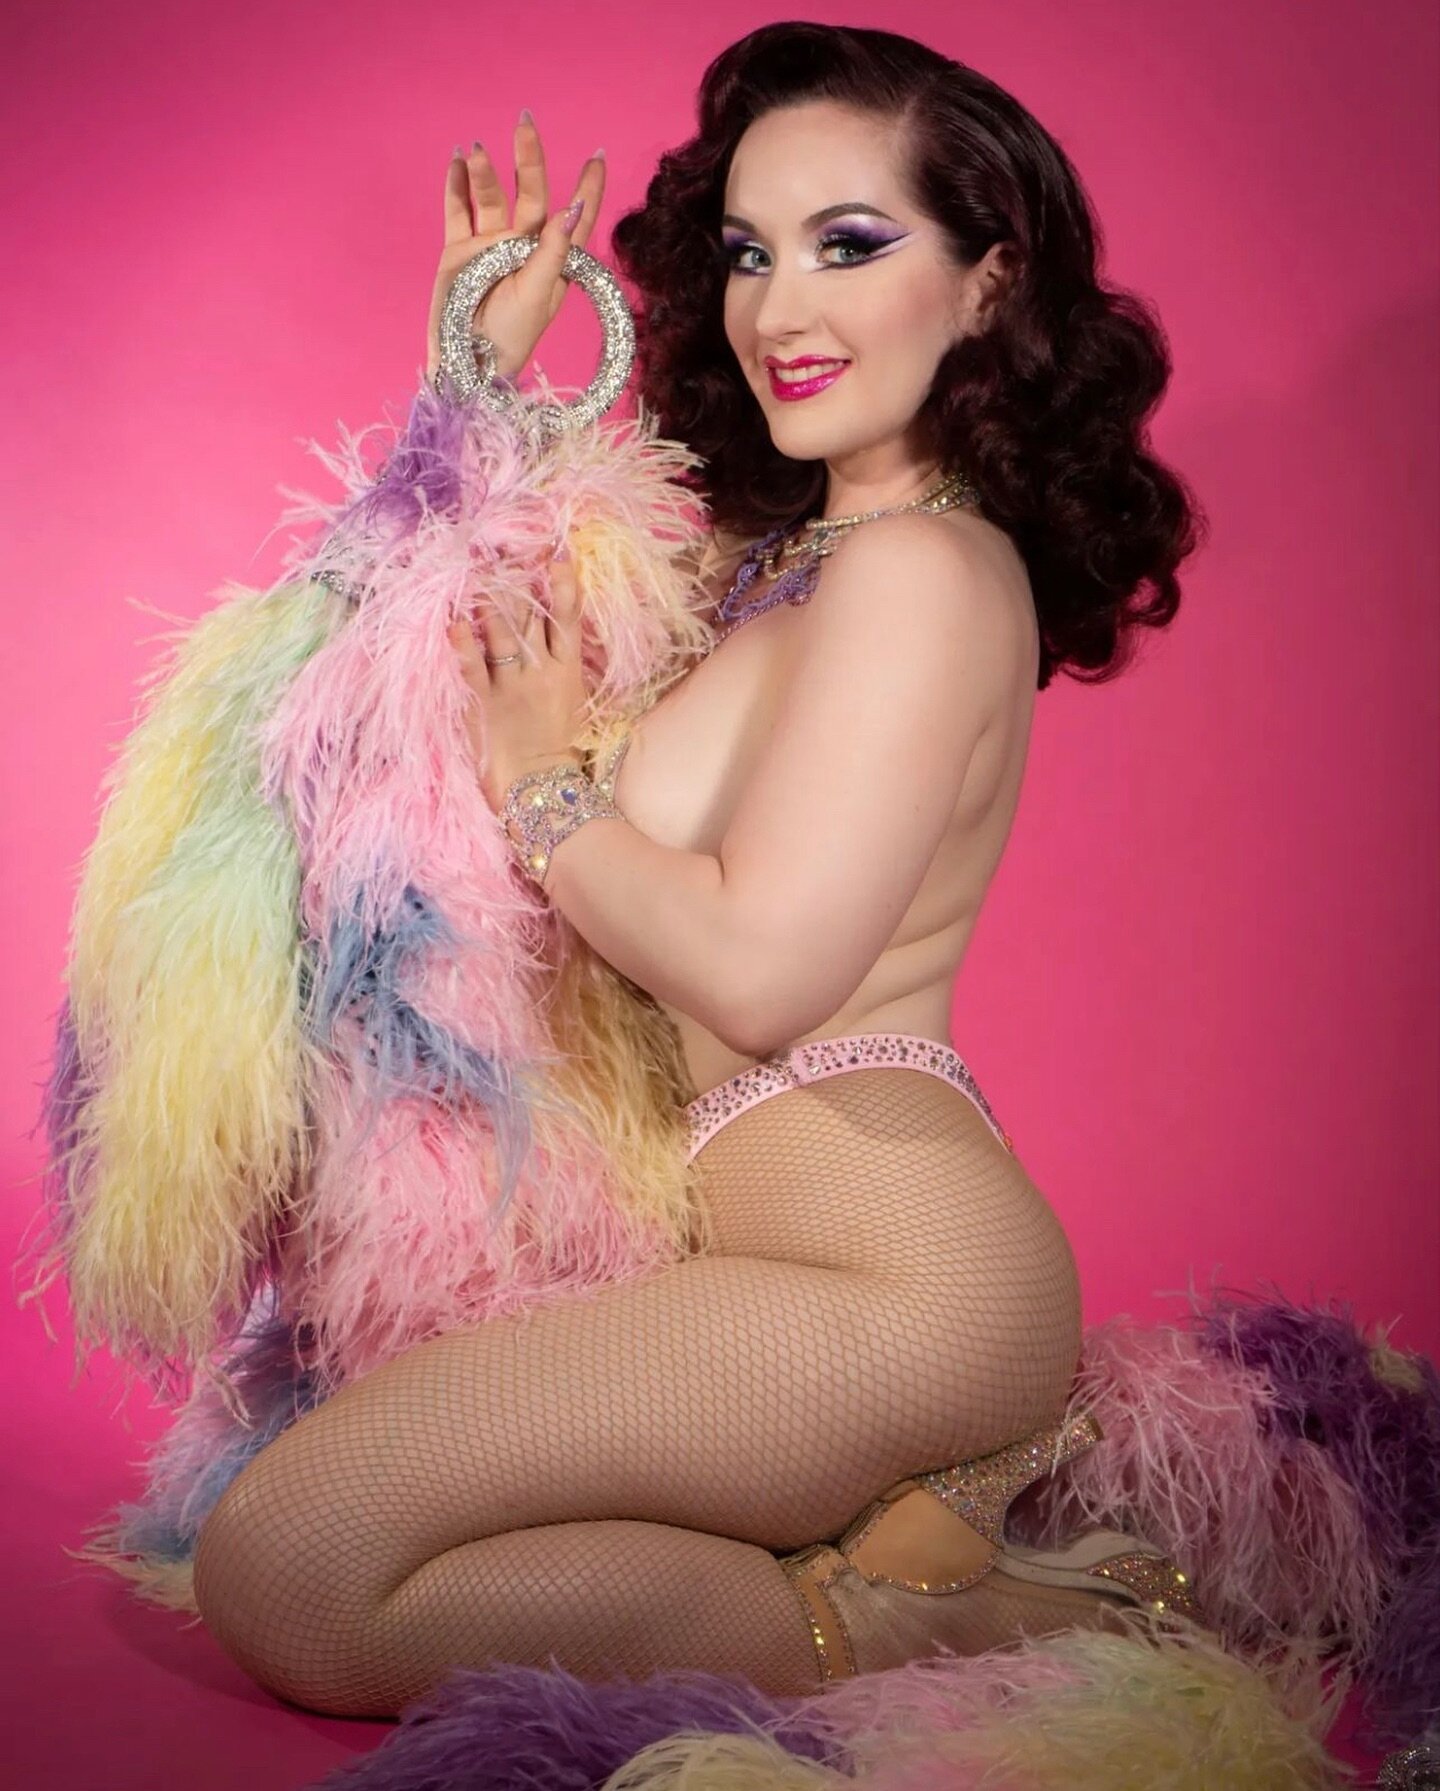 Boa Fam! @medianocheburlesque has named her Pastel Unicorn @kingsizeboa &lsquo;QUEEN EMPRESS BABY&rsquo; what have you named yours?!&hellip; Add your boa color and name below. 😃

Photo by @desiree.de.sade